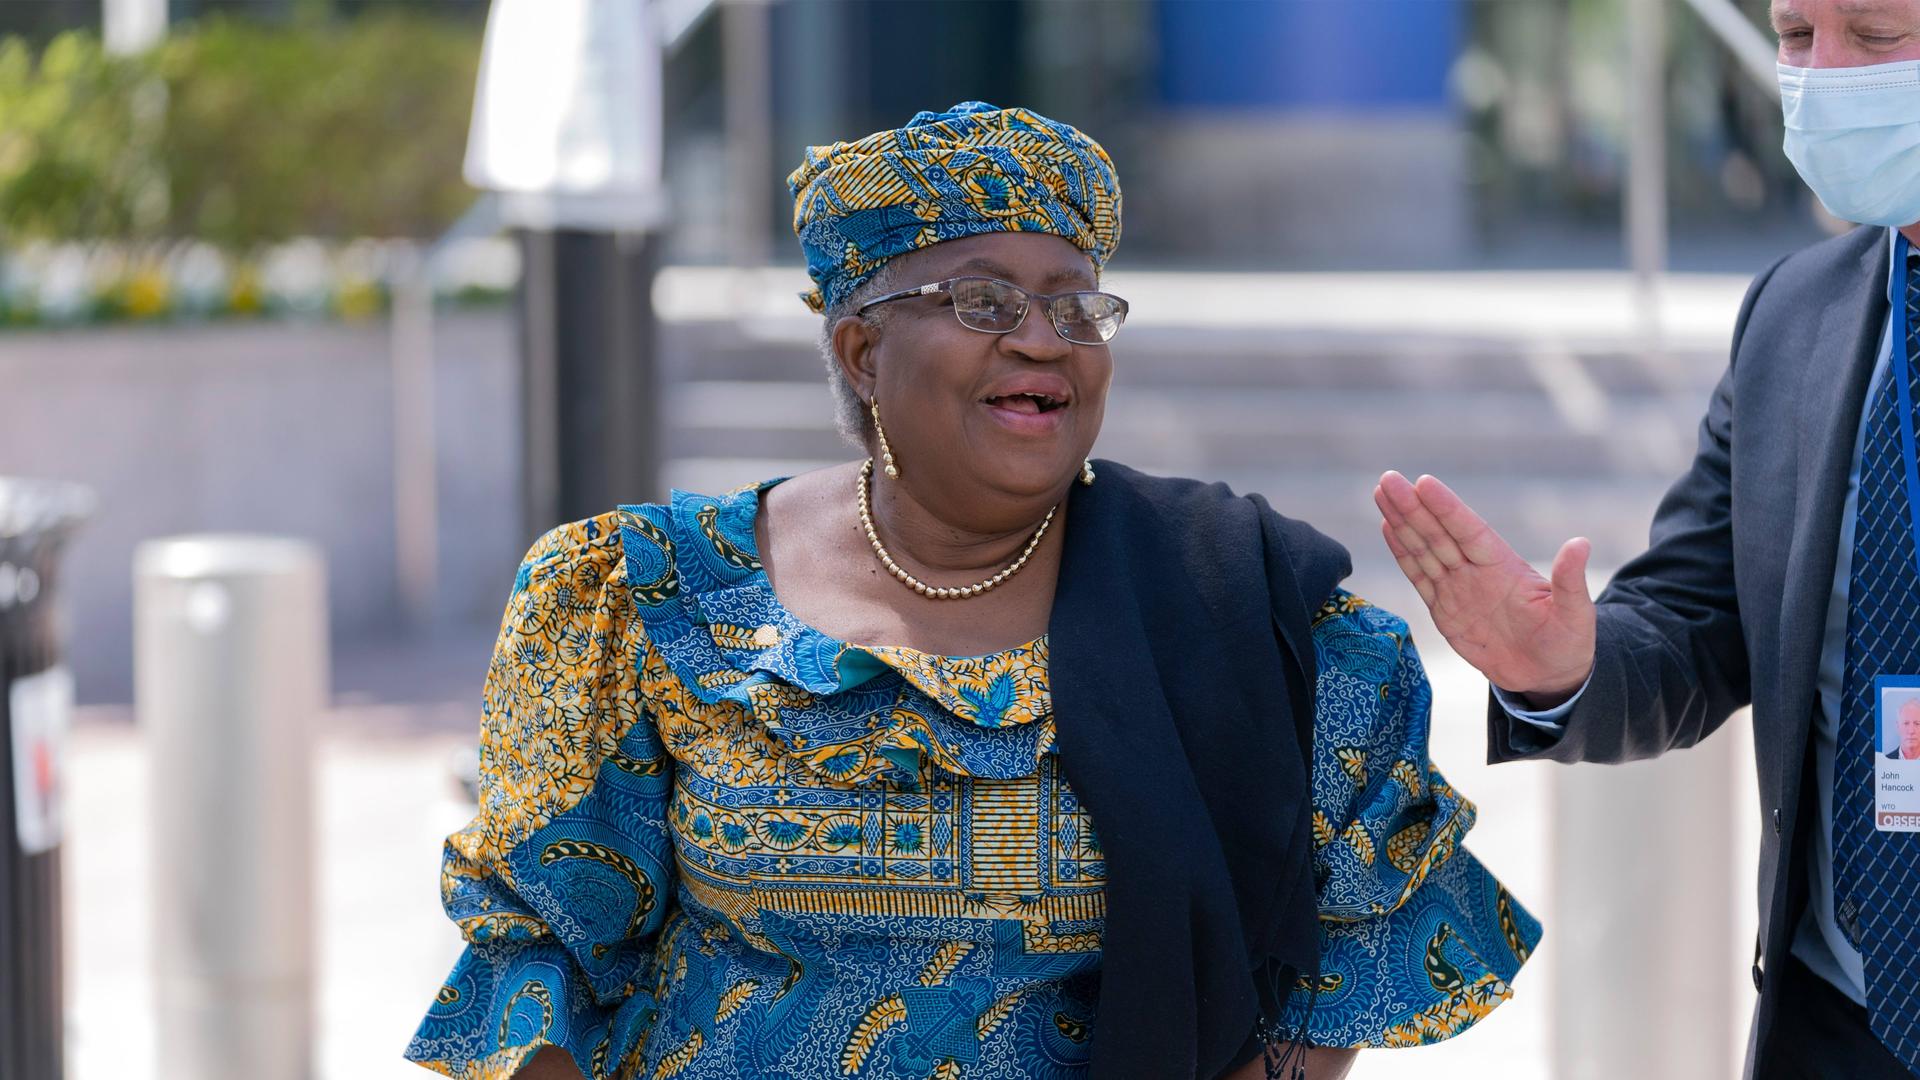 Director General of the World Trade Organization Ngozi Okonjo-Iweala walks outside of the International Monetary Fund building during the World Bank/IMF Spring Meetings in Washington DC in April, 2022. 